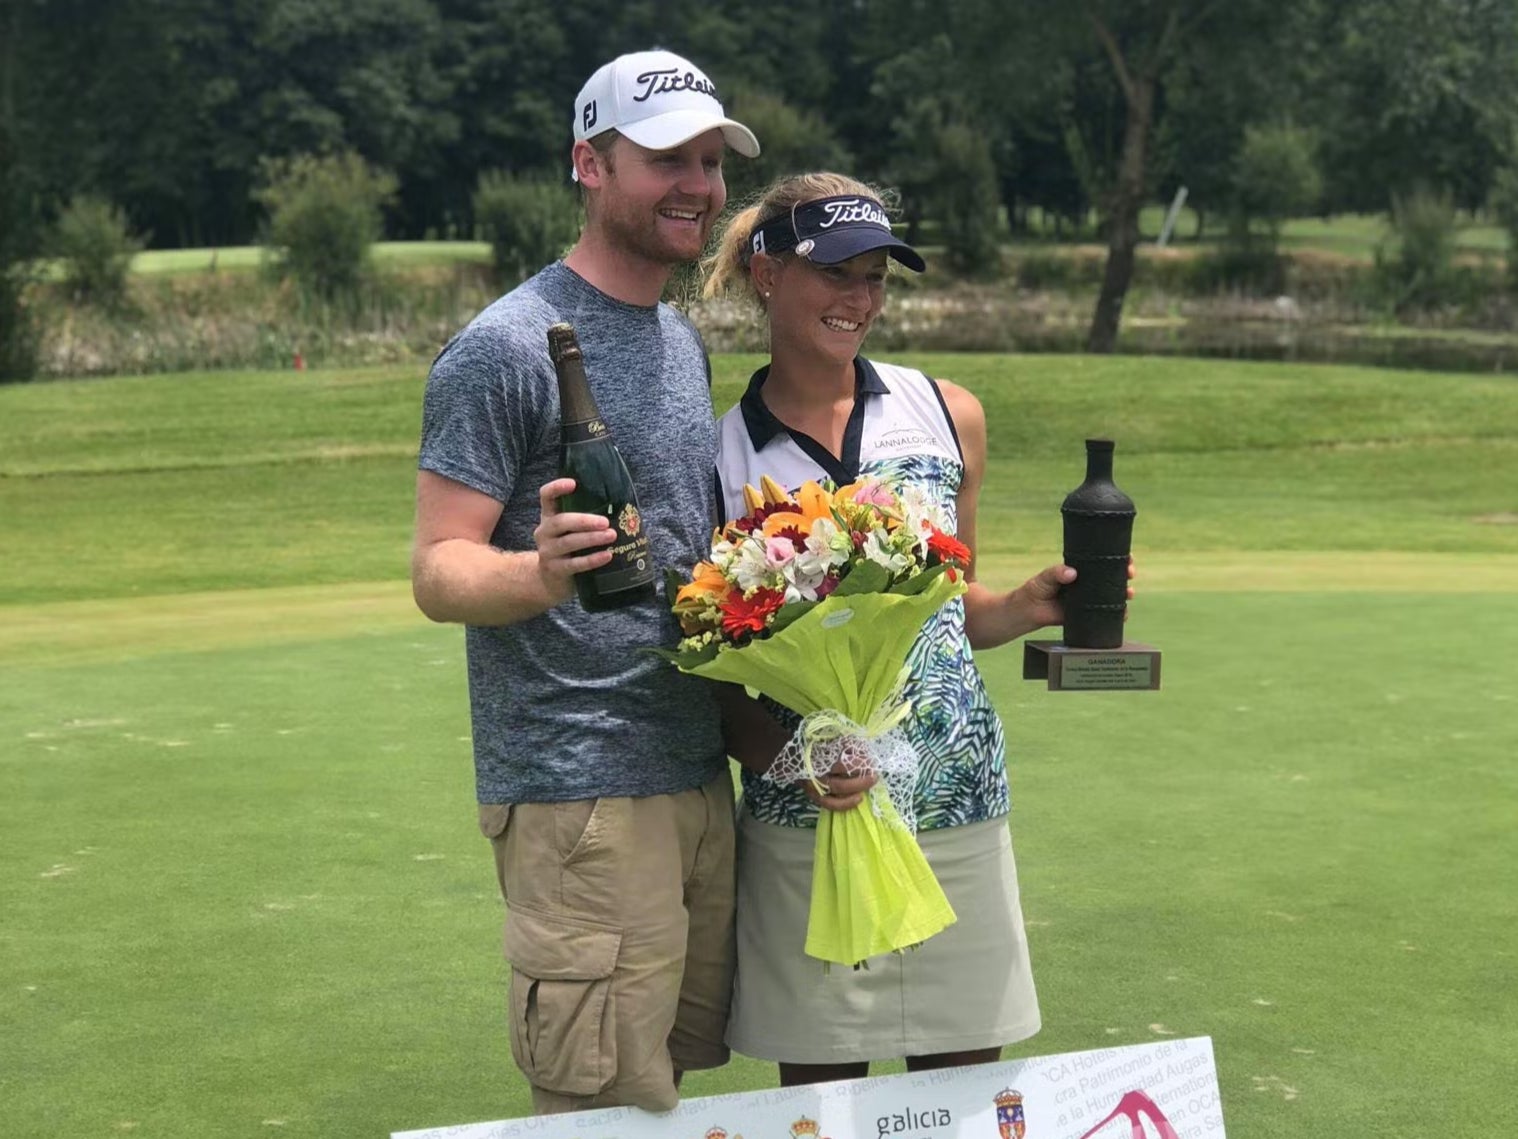 Open qualifier Alex Wrigley will have his wife Johanna Gustavsson, a professional on the Ladies European Tour, caddying for him at The Open (Credit: Alex Wrigley)